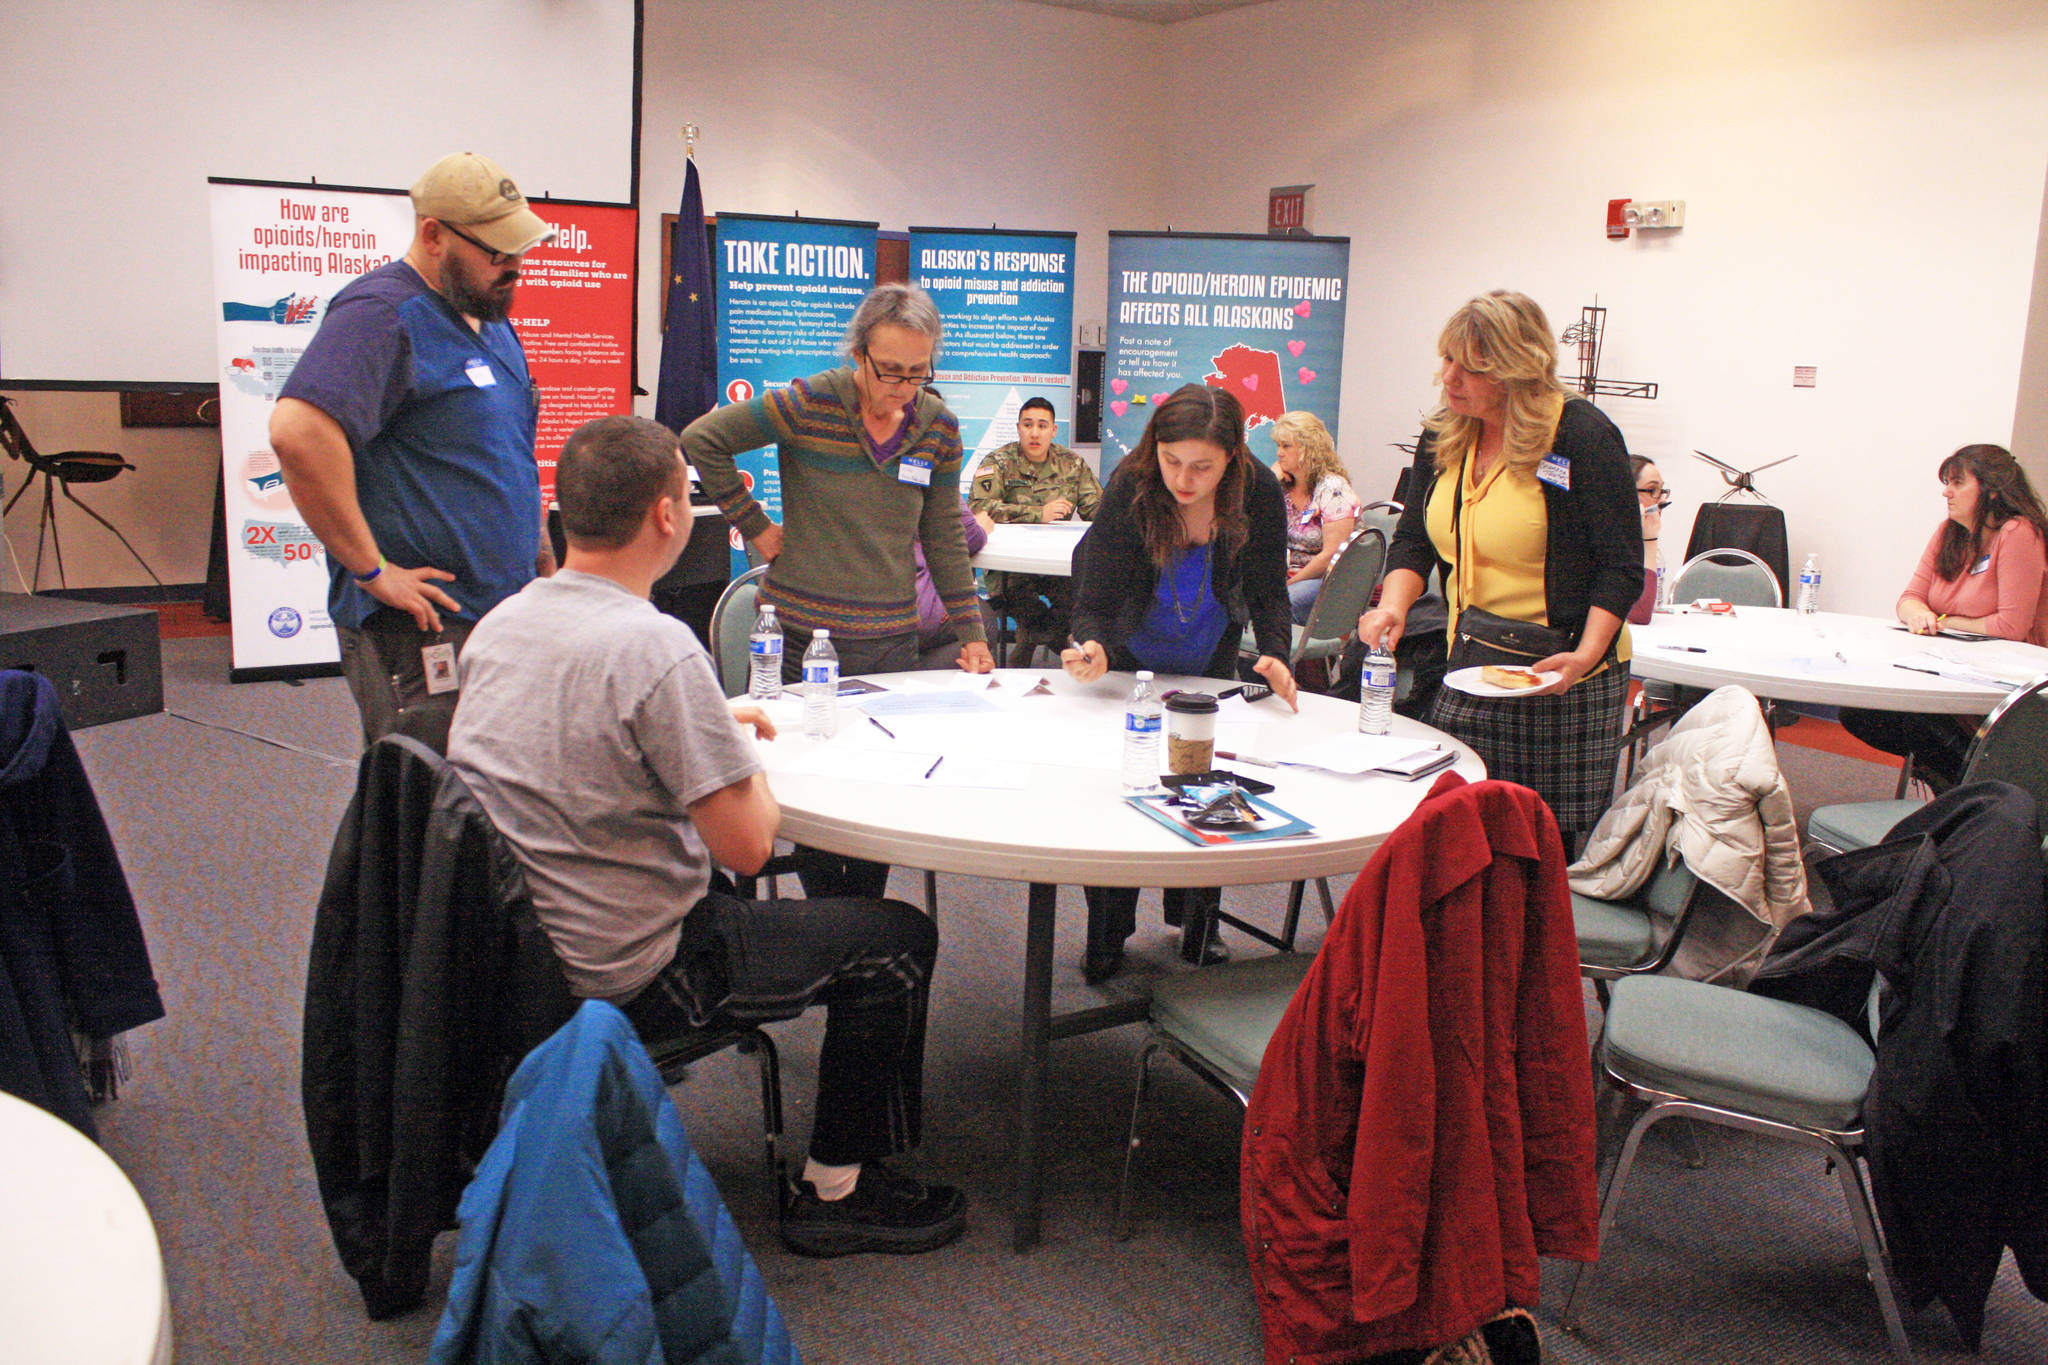 Members of the Kenai community brainstorm on opioid response efforts during the Your Voice, Your Community forum on Thursday, March 8, 2018 at the Kenai Visitors and Cultural Center in Kenai, Alaska. (Photo by Erin Thompson/Peninsula Clarion)